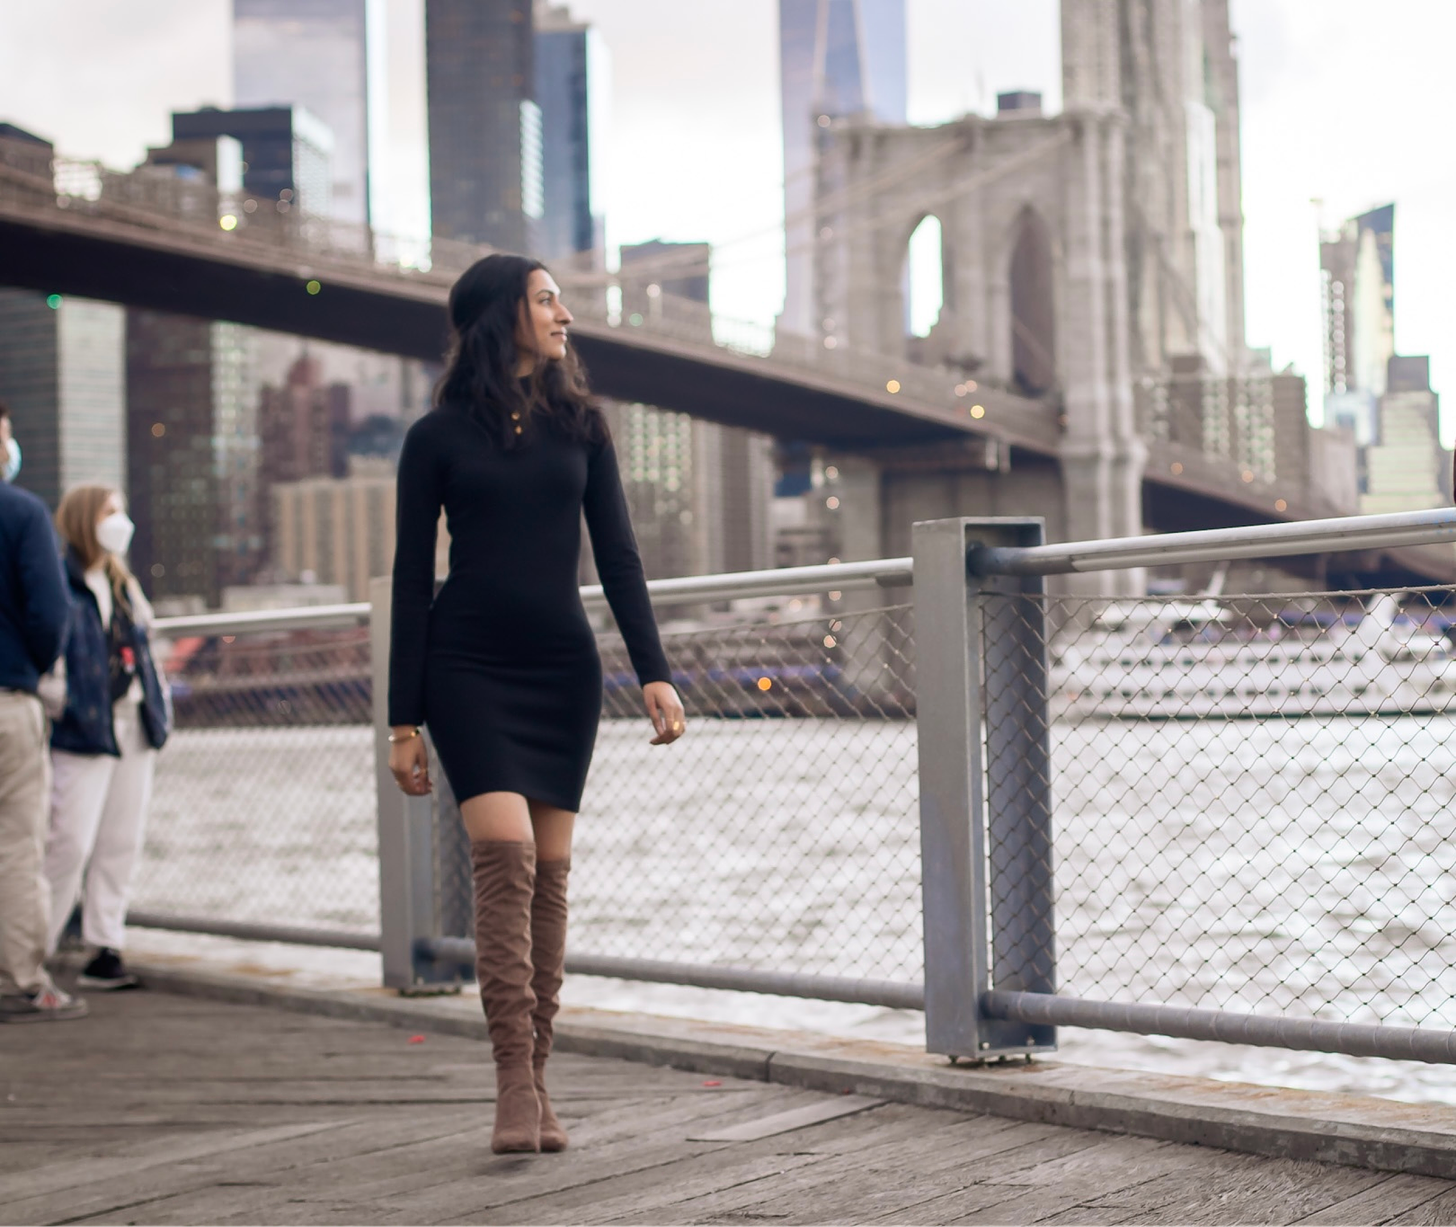 Abi in a black dress and brown boots walking towards the camera in front of a blurry Brooklyn Bridge.